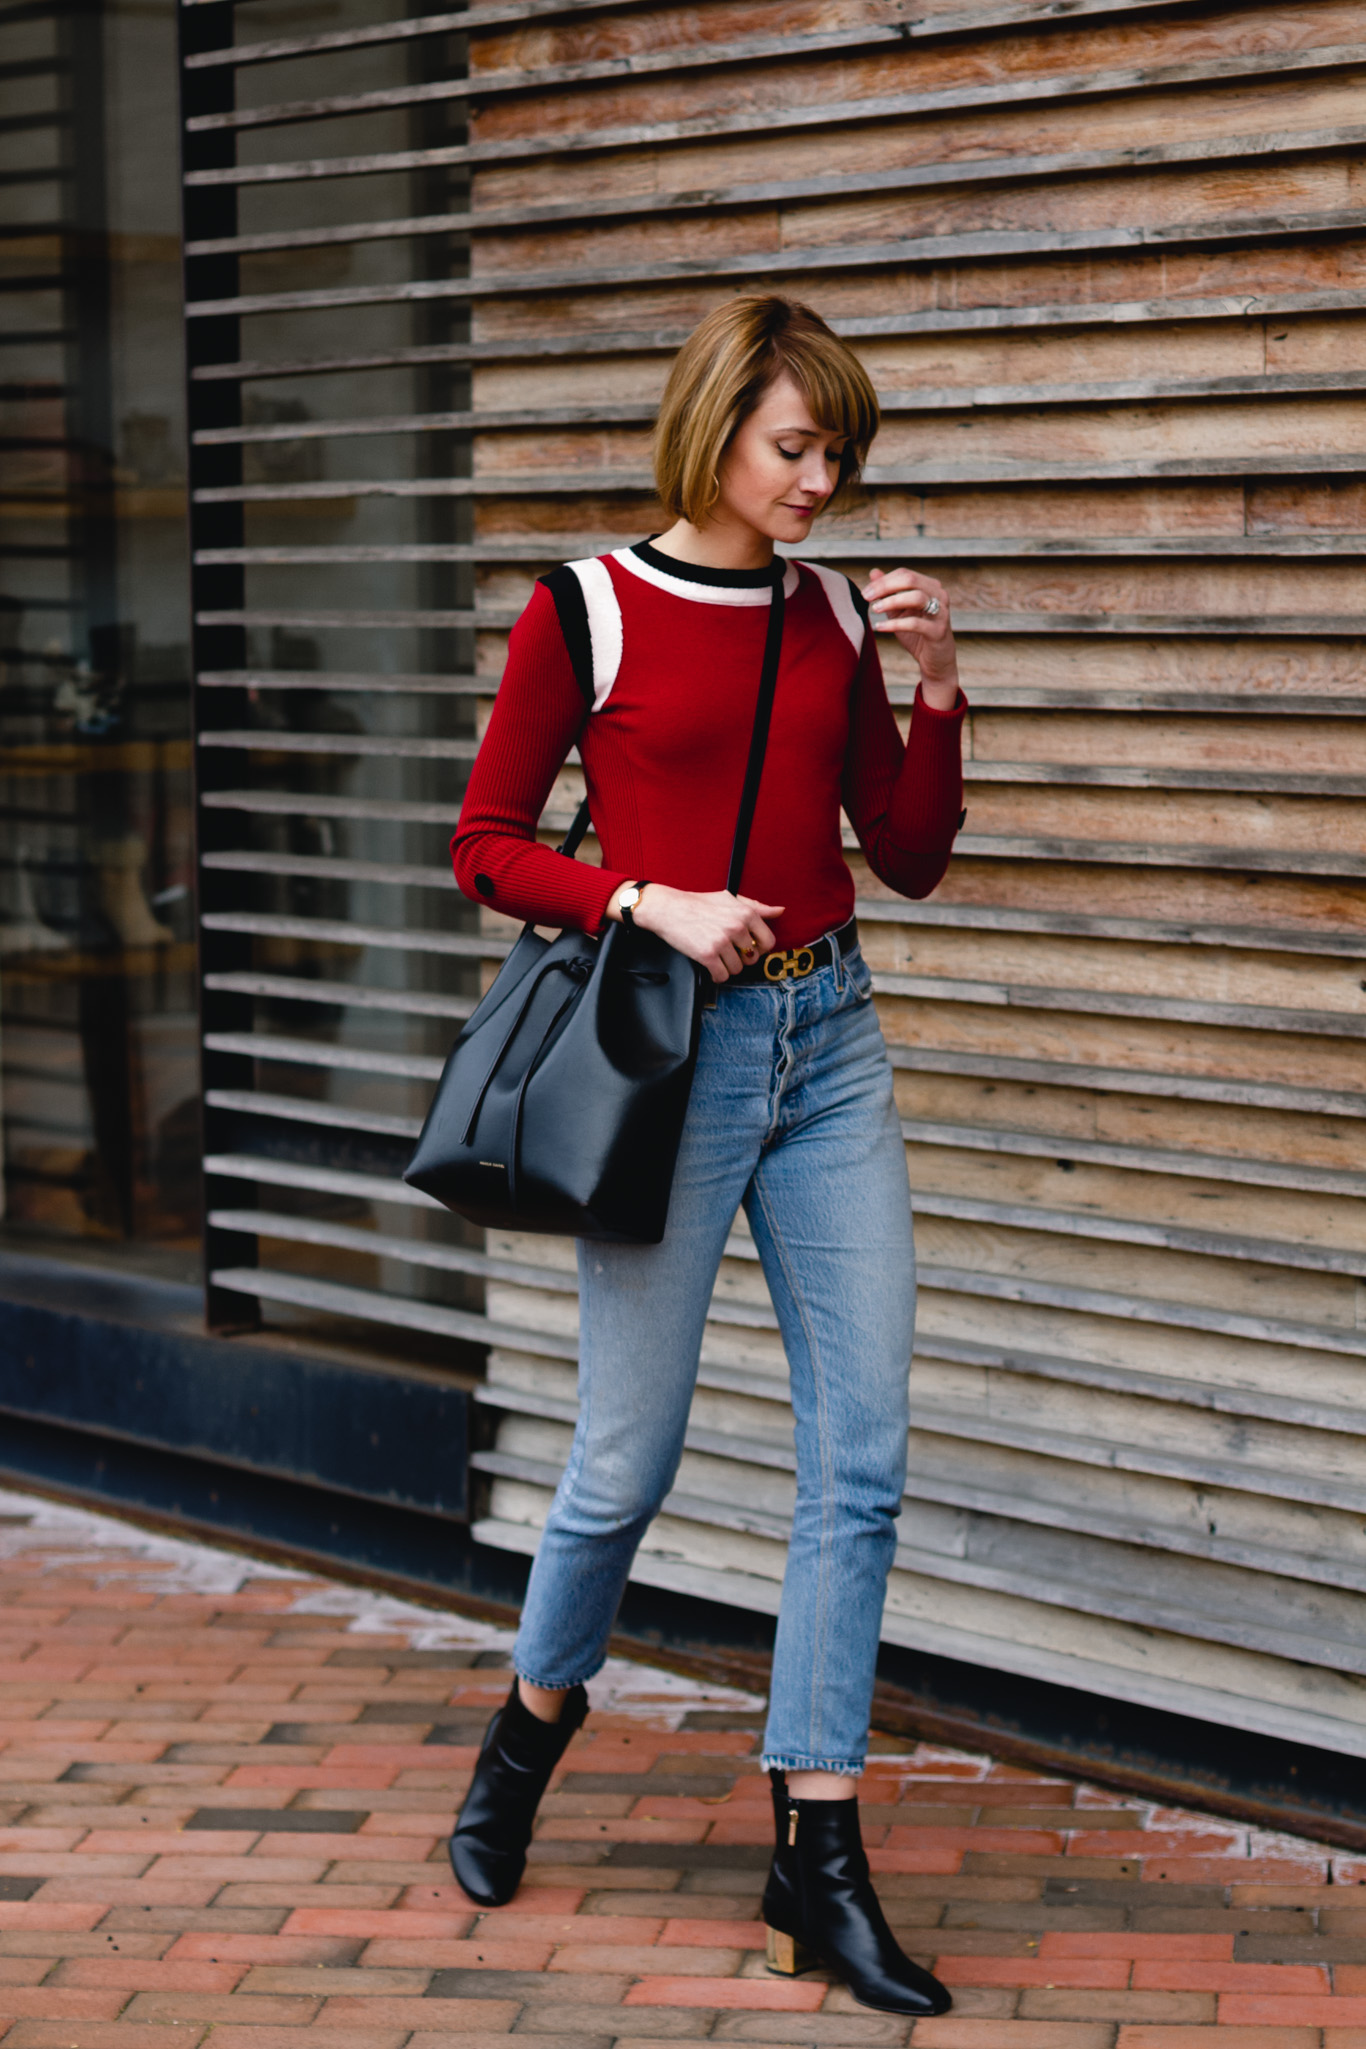 Marni sweater, RE/DONE jeans, and Mansur Gavriel bag